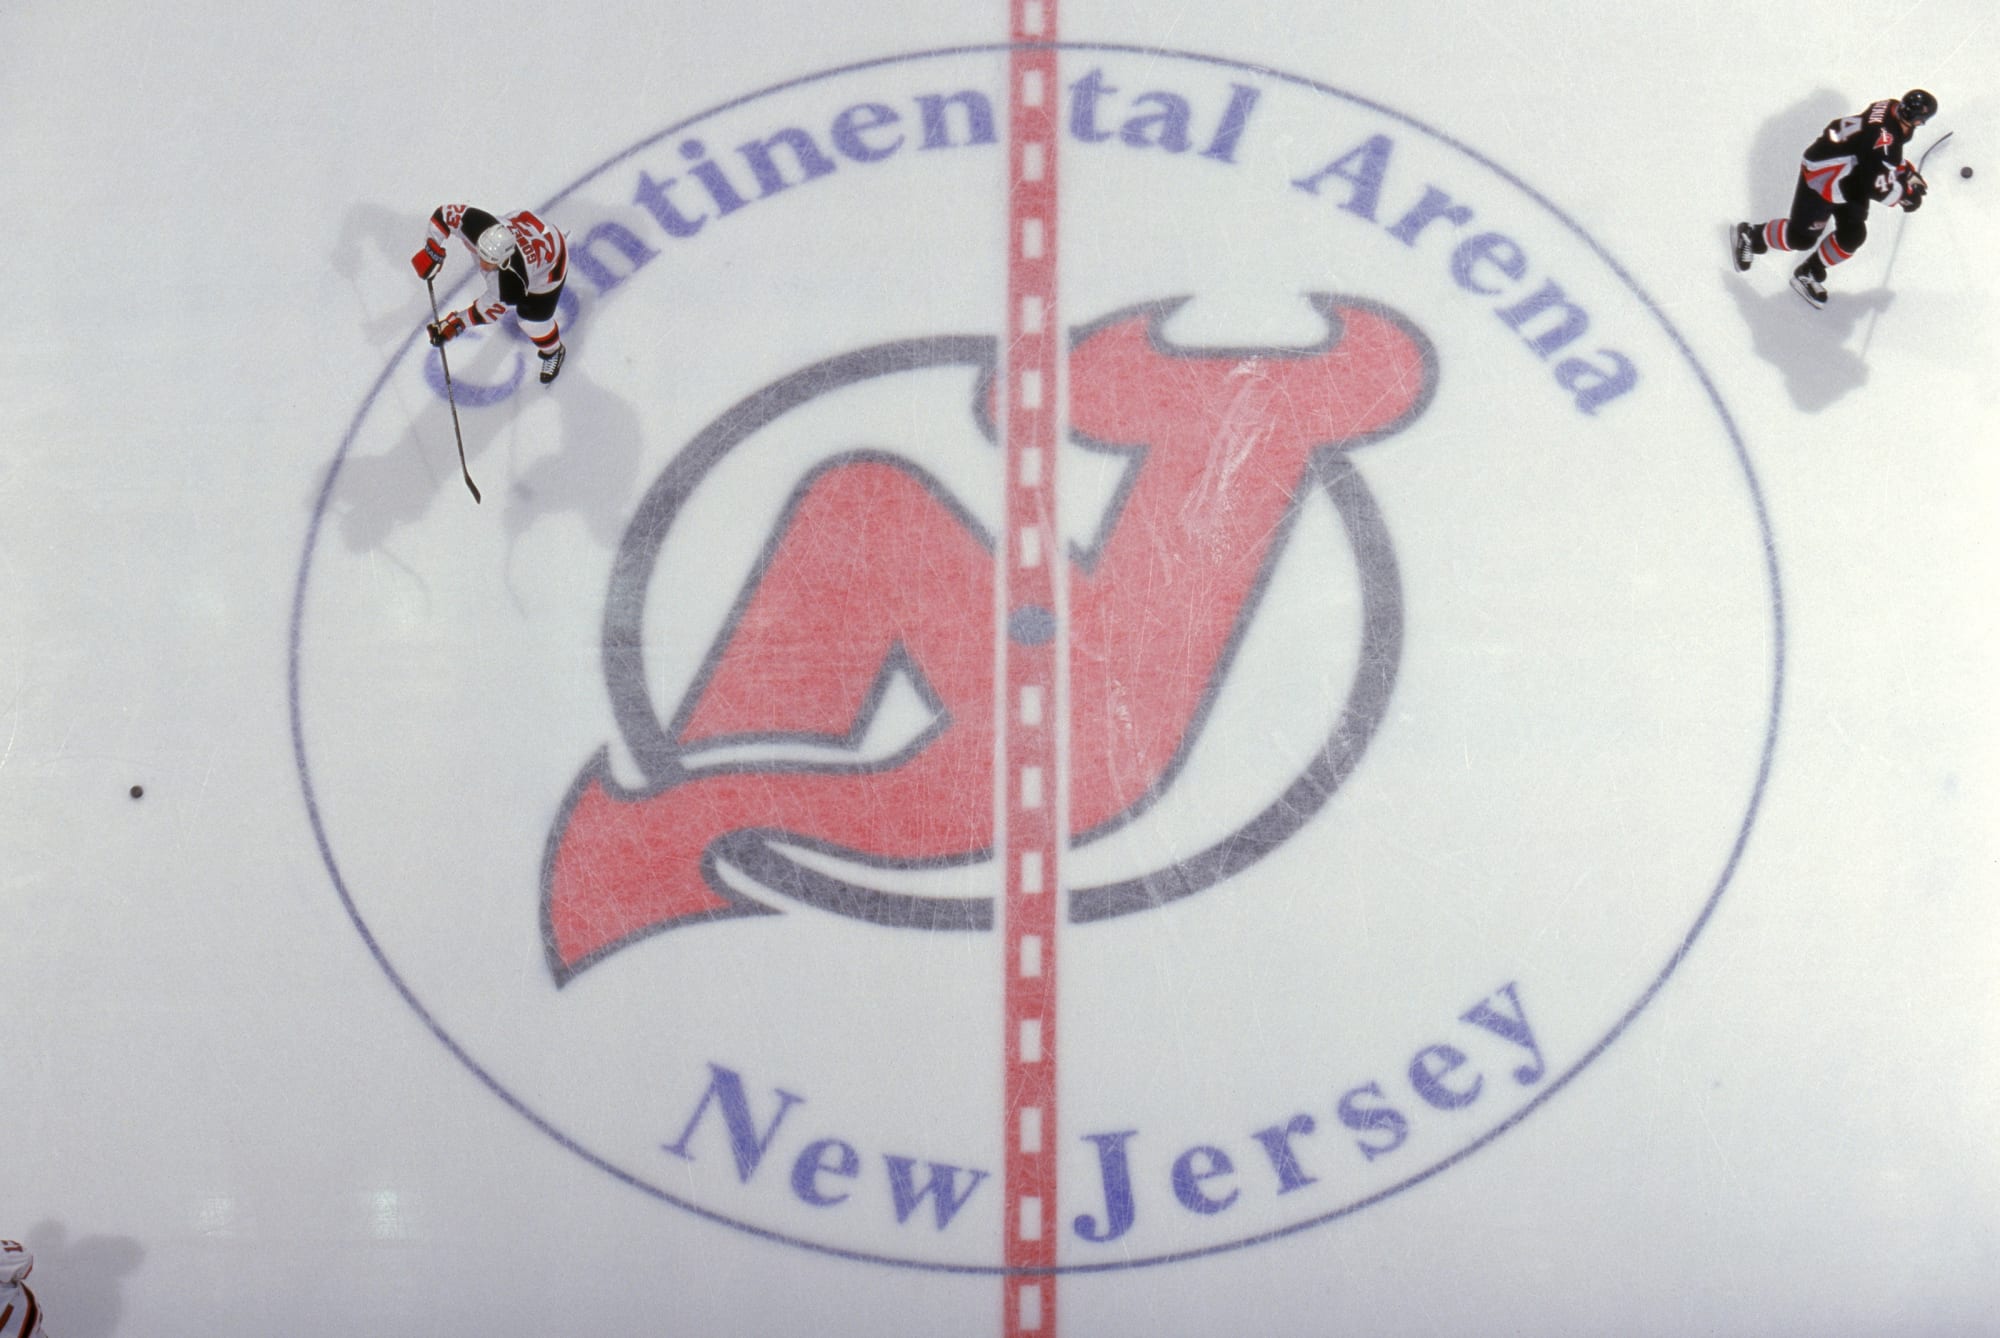 Continental Airlines Arena - Rutherford NJ  Continental airlines, New  jersey devils, Airlines